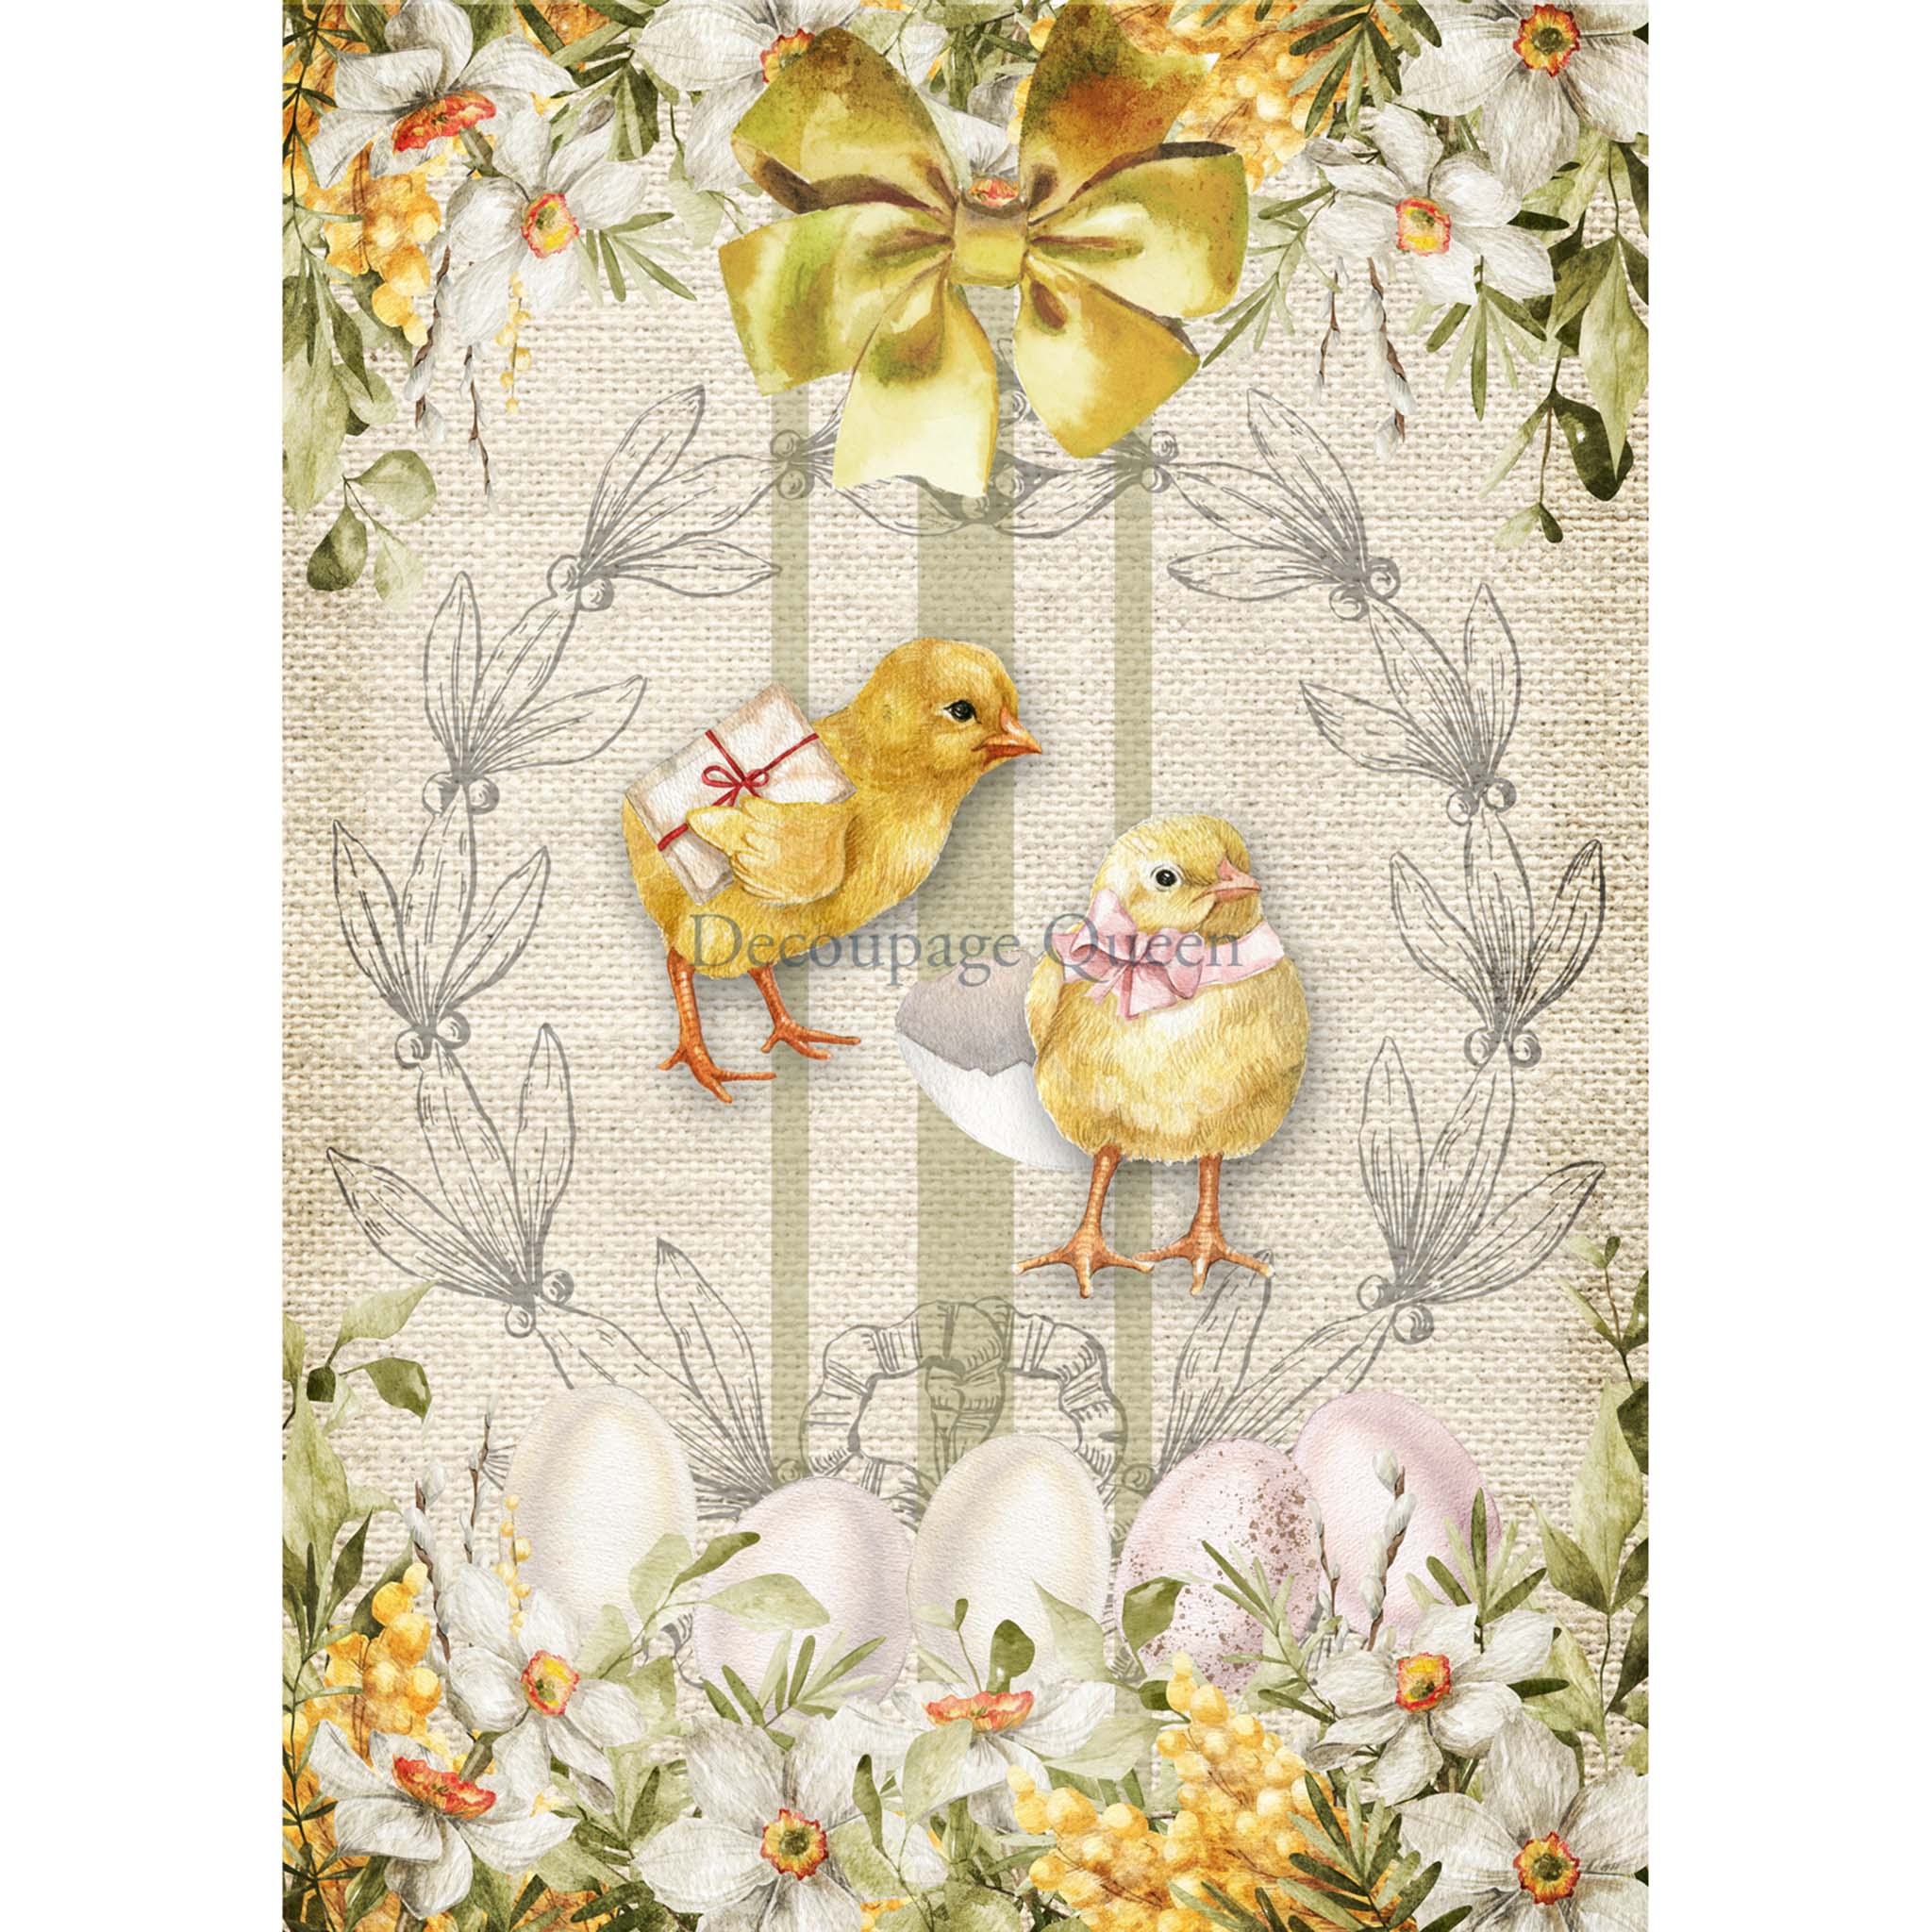 A3 rice paper design that features  two adorable yellow chicks nestled amidst a floral backdrop on a rustic grain sack. White borders are on the sides.